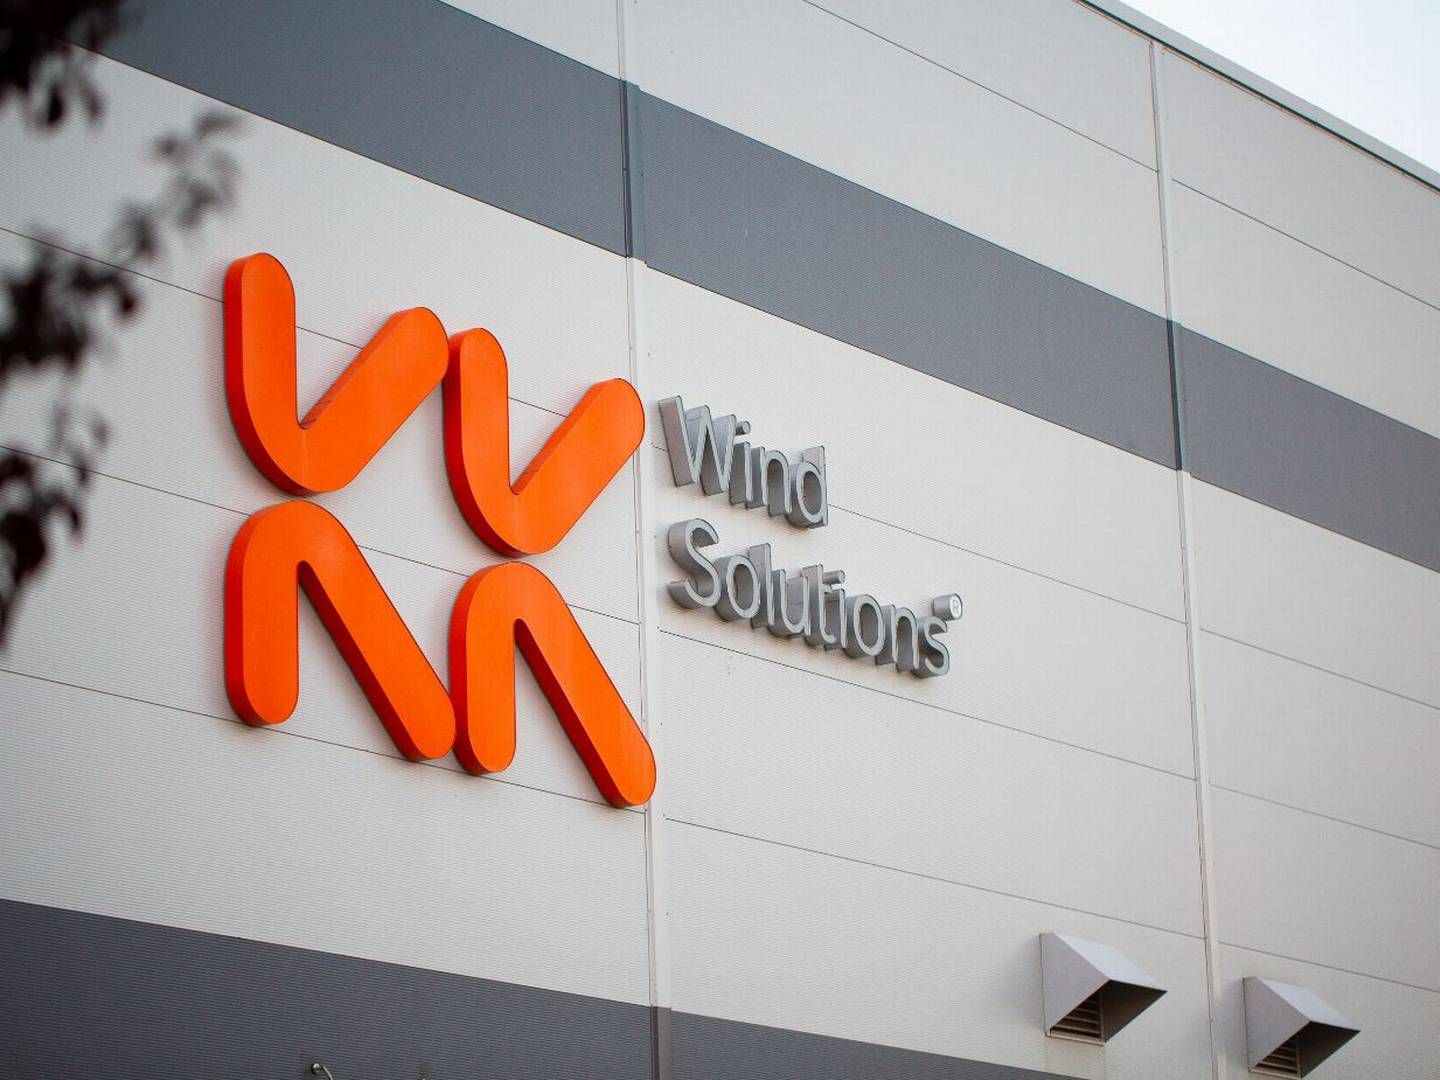 Acquisitions dint 2022 financial report, but KK Wind Solutions still guided for a sound 2023. | Photo: Kk Wind Solutions